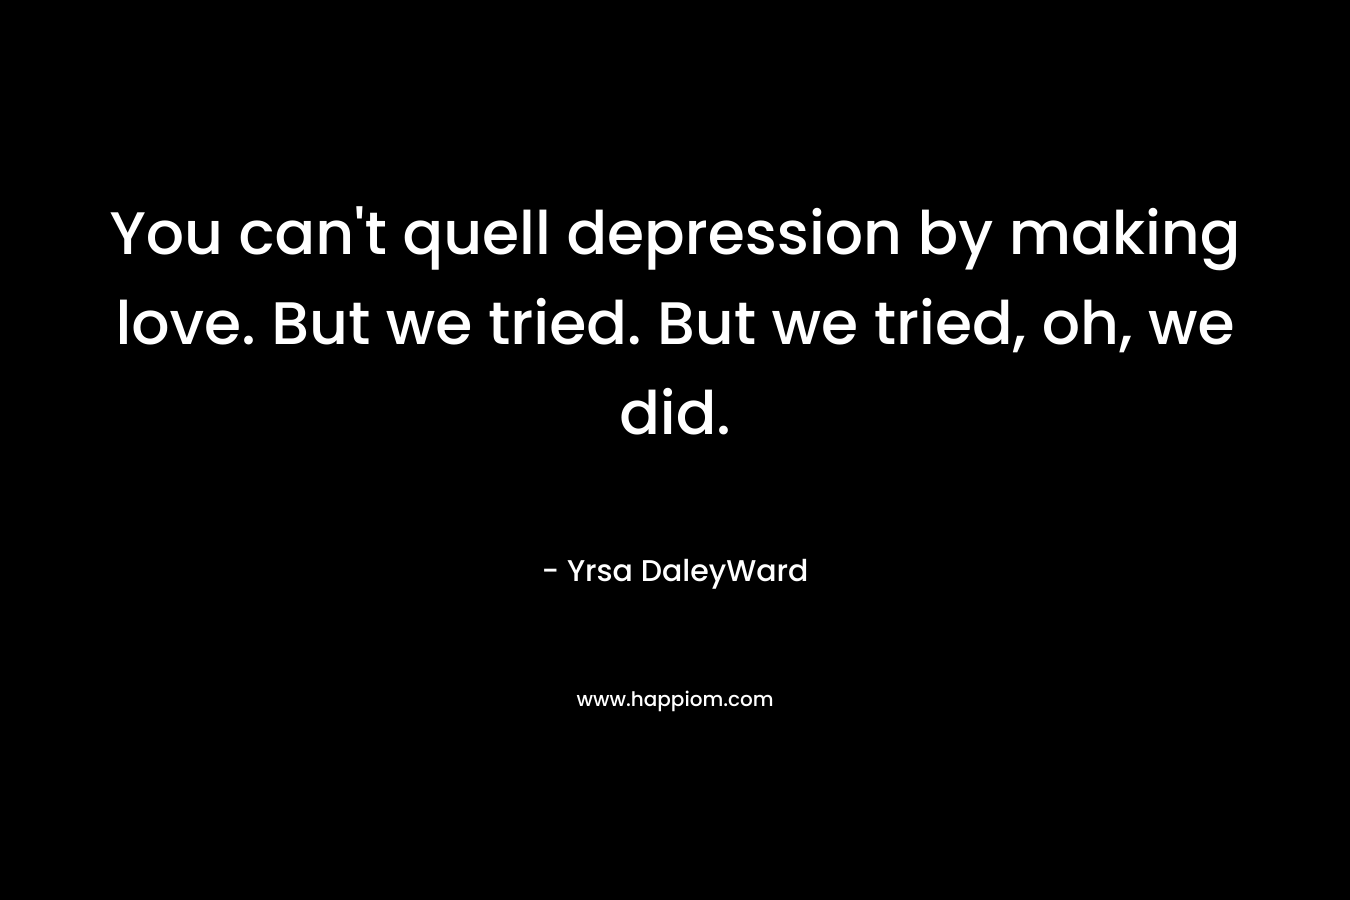 You can’t quell depression by making love. But we tried. But we tried, oh, we did. – Yrsa DaleyWard